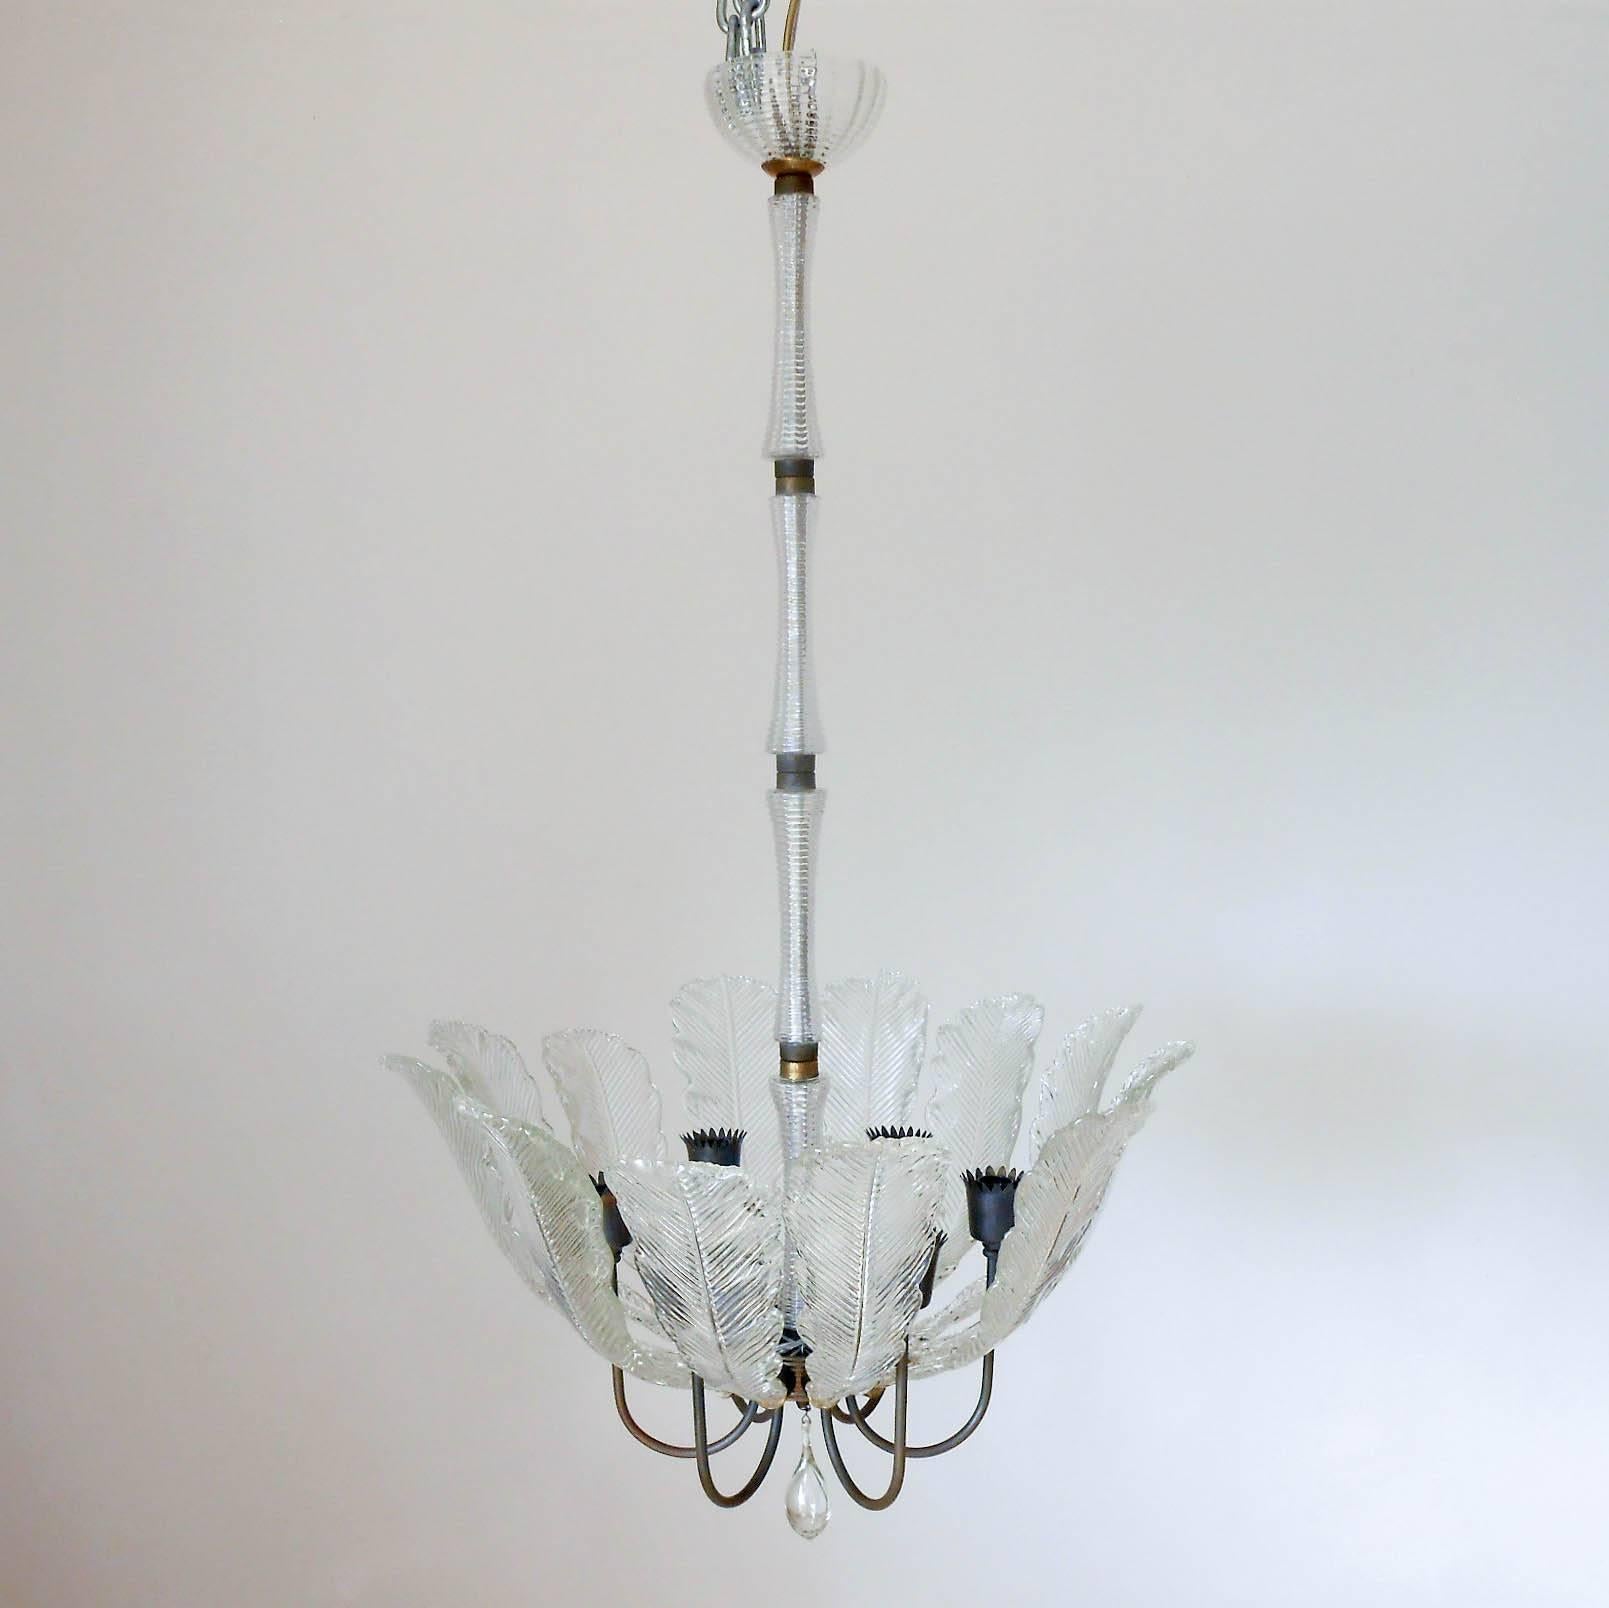 Vintage Italian chandelier or pendant with clear Murano glass leaves, mounted on bronze frame / Designed by Ercole Barovier circa 1950’s / Made in Italy
6 lights / E12 type / max 40W each
Height: 41 inches / Diameter: 24 inches 
1 in stock in Palm